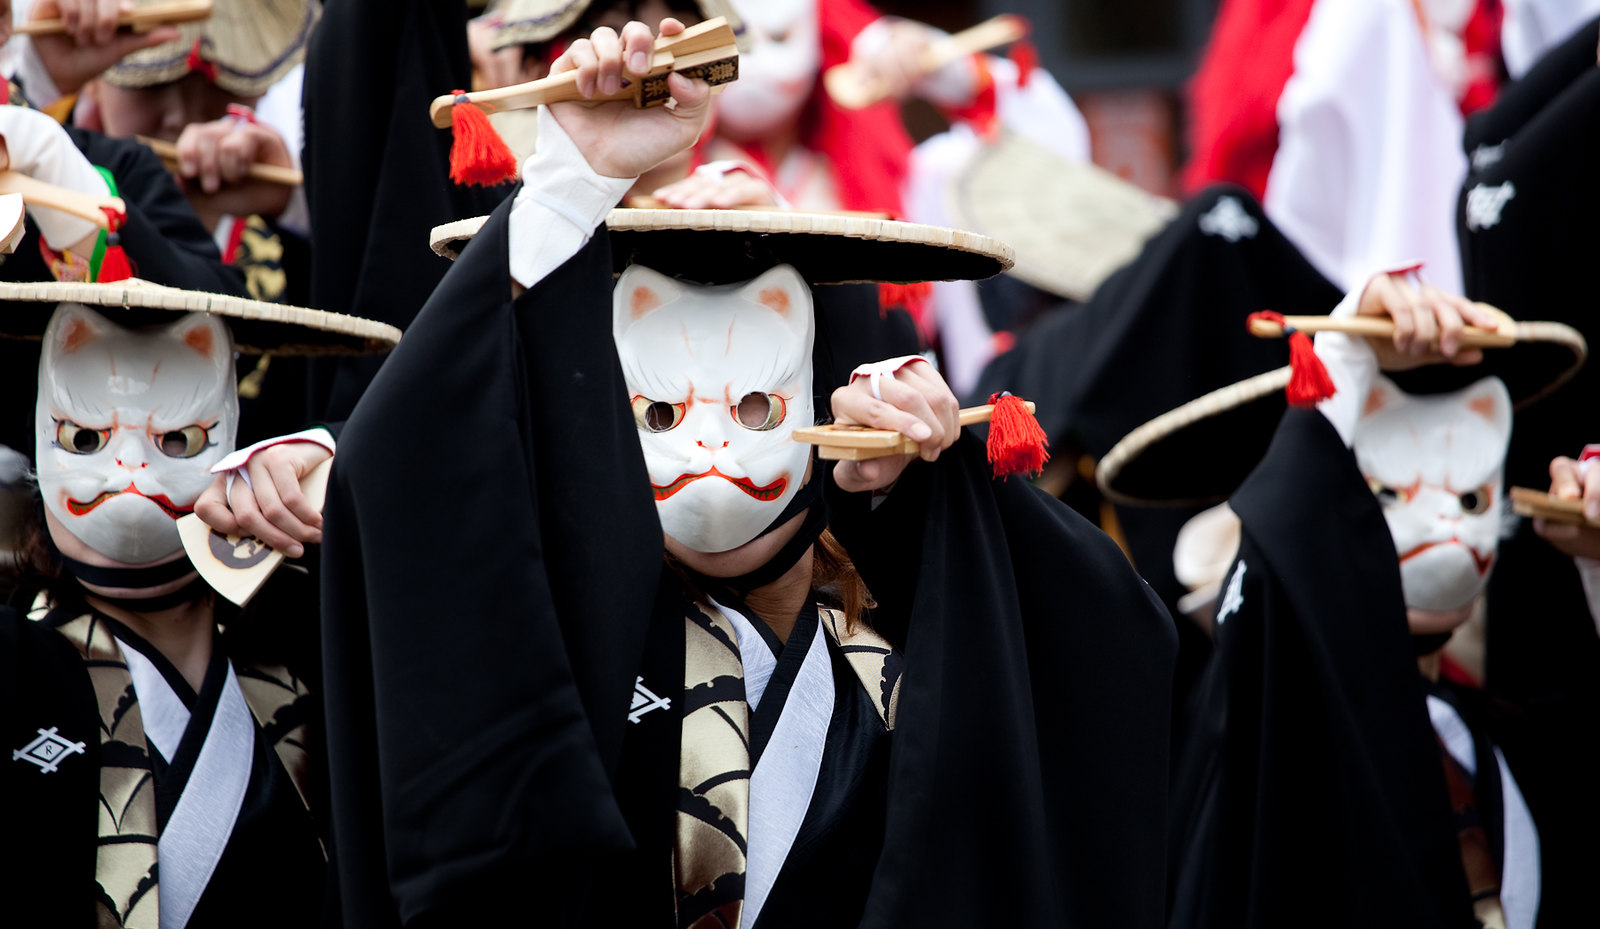 Several people in a parade, wearing Japanese style costumes and white cat masks. They appear to doing a coreographed dance.